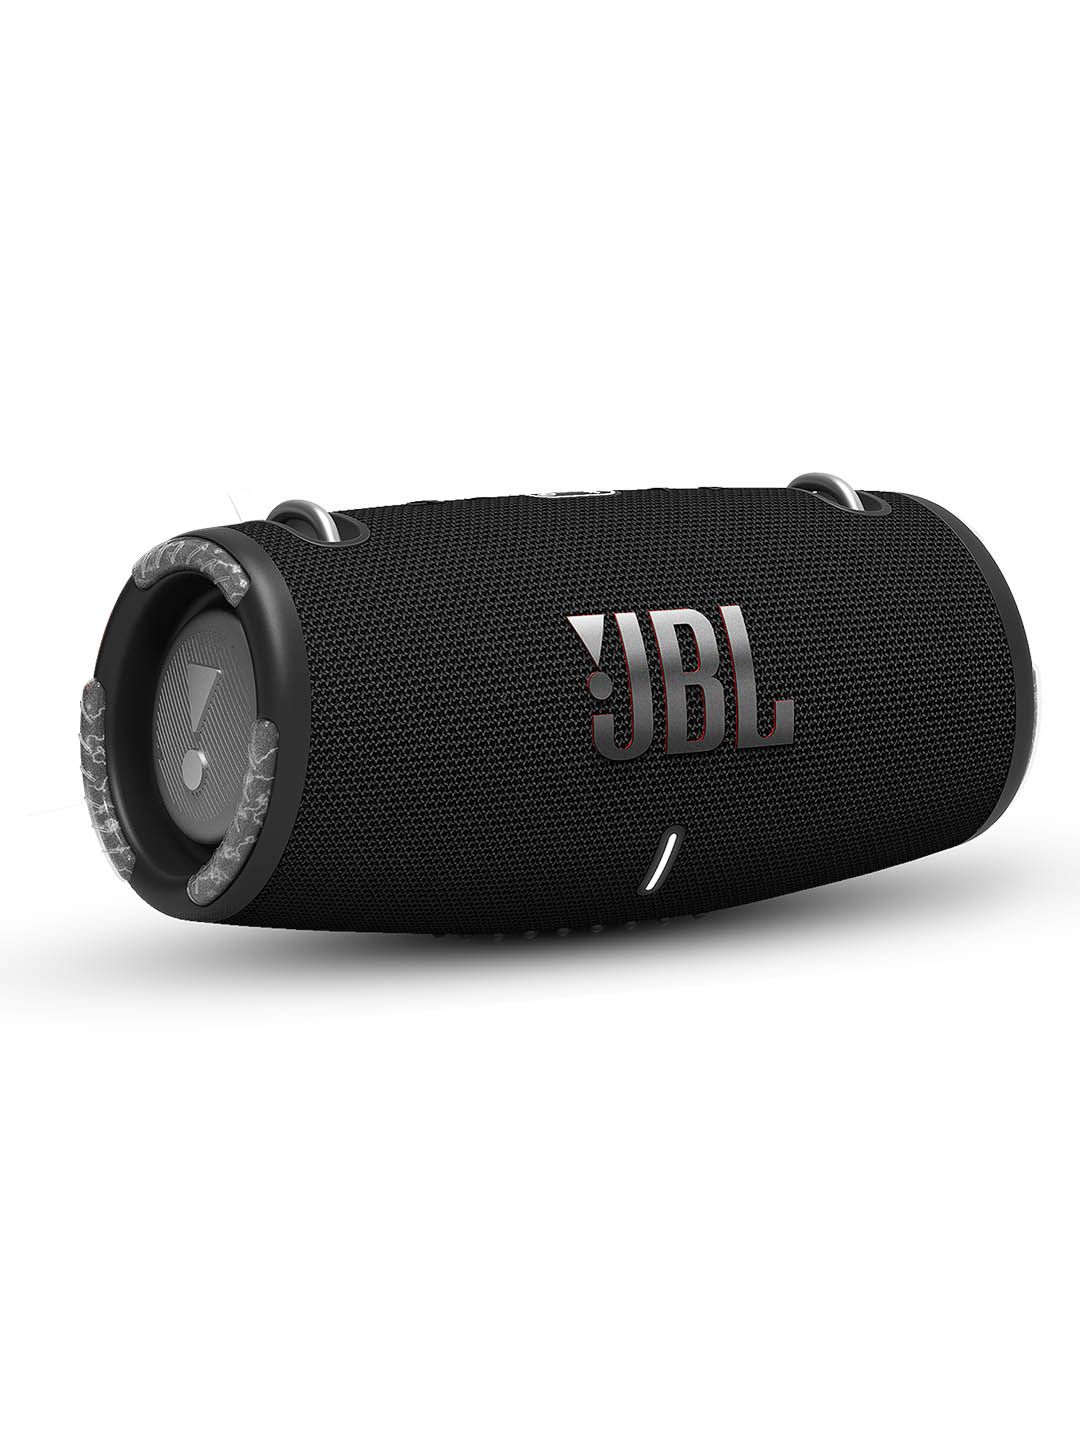 JBL Xtreme 3 Wireless Portable Bluetooth Speaker Without Mic - Black Price in India